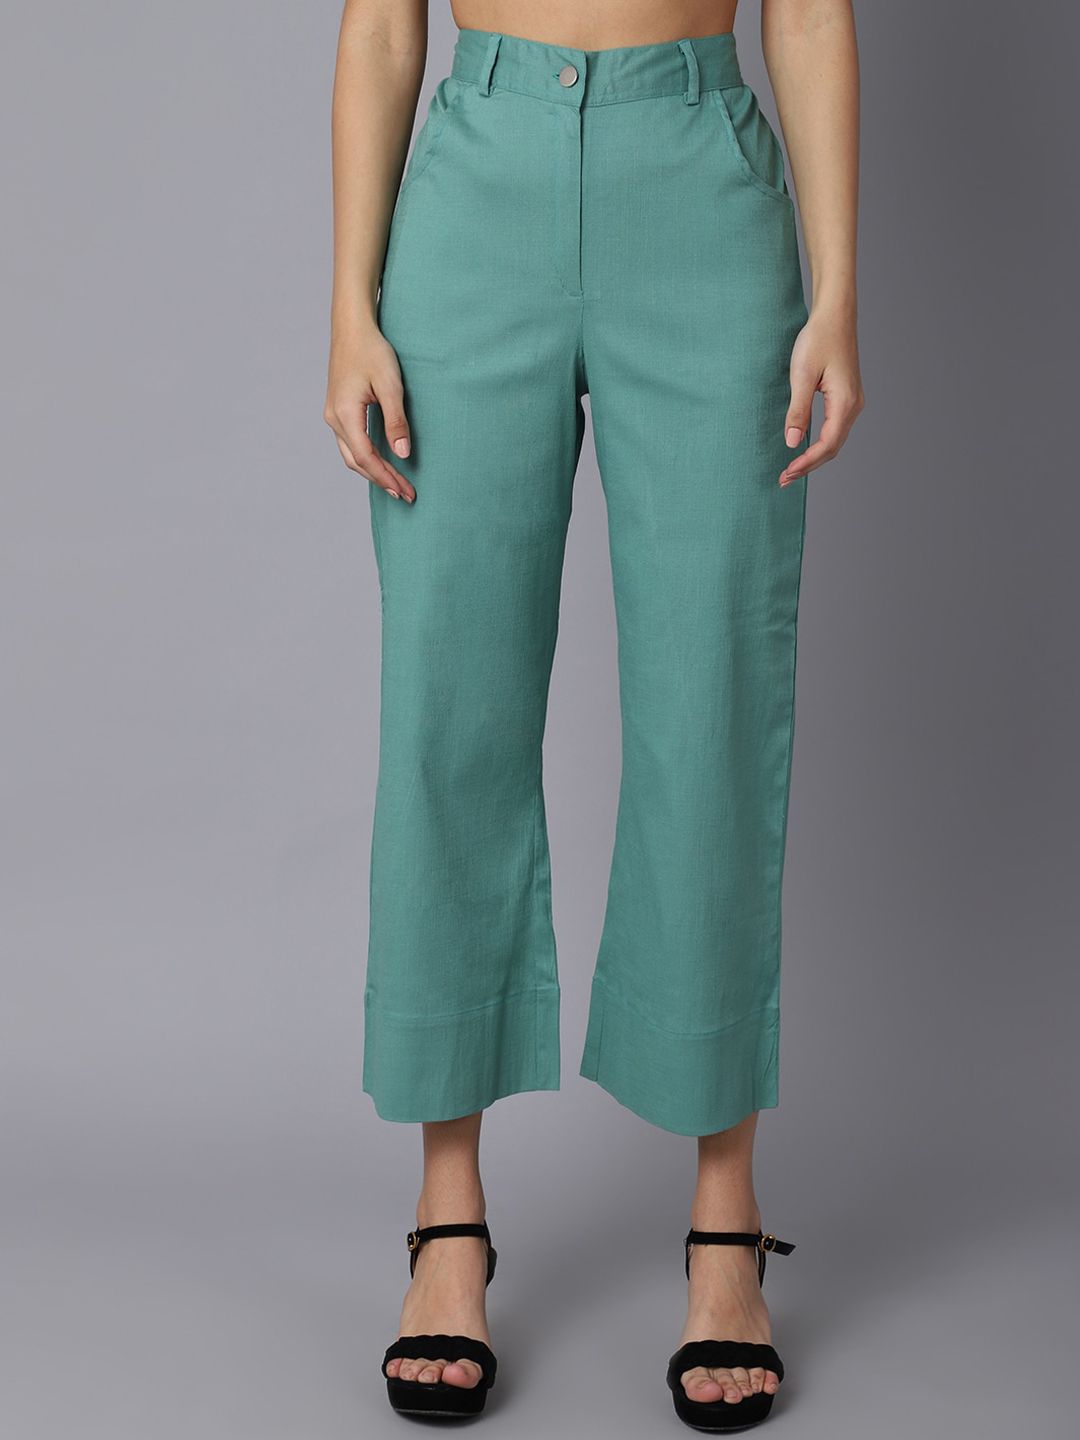 TAG 7 Women Turquoise Blue Smart Flared Trousers Price in India